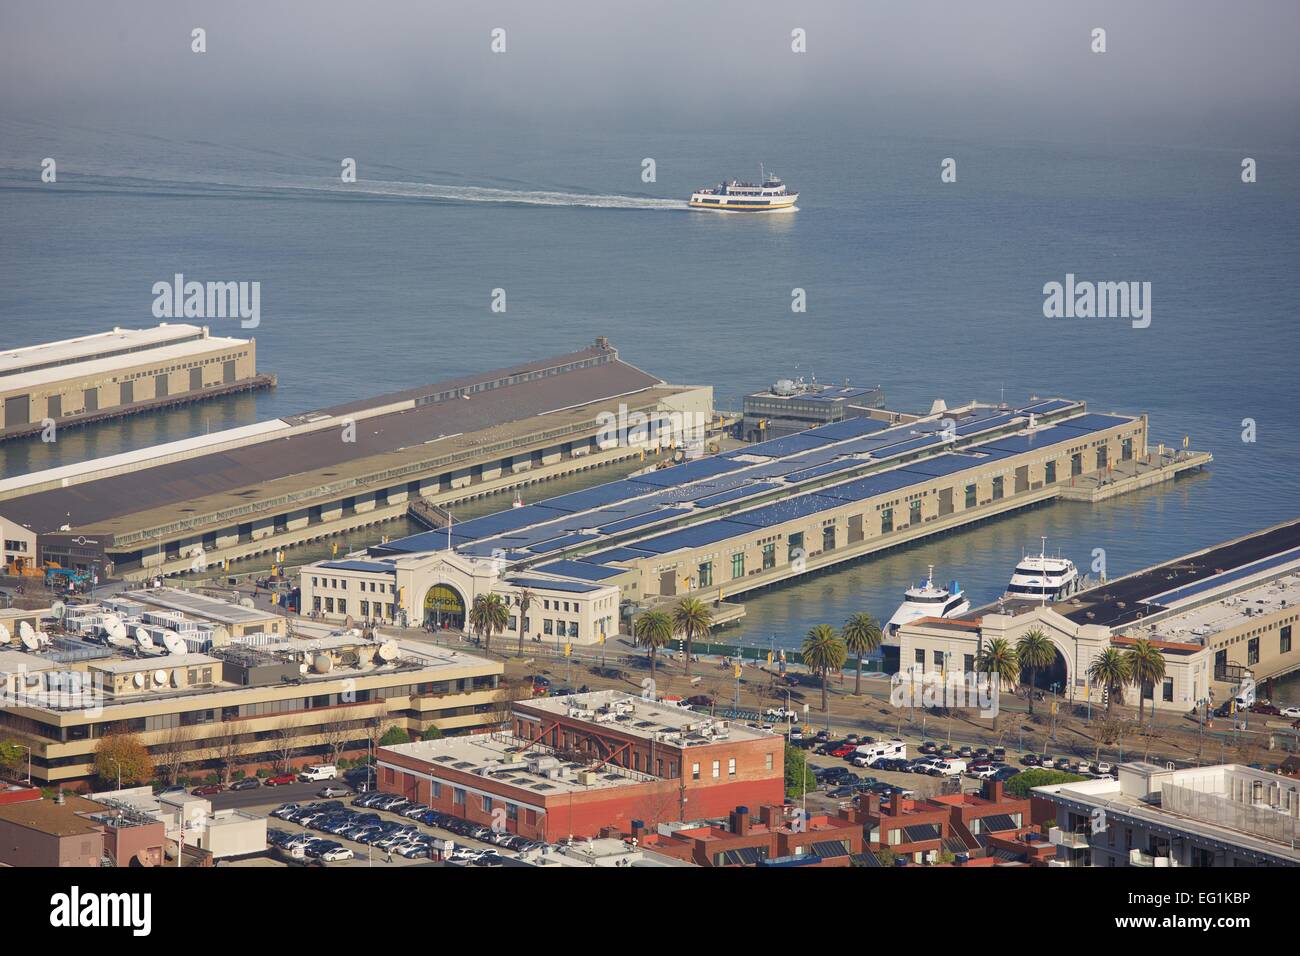 Aerial view of San Francisco's waterfront piers Stock Photo